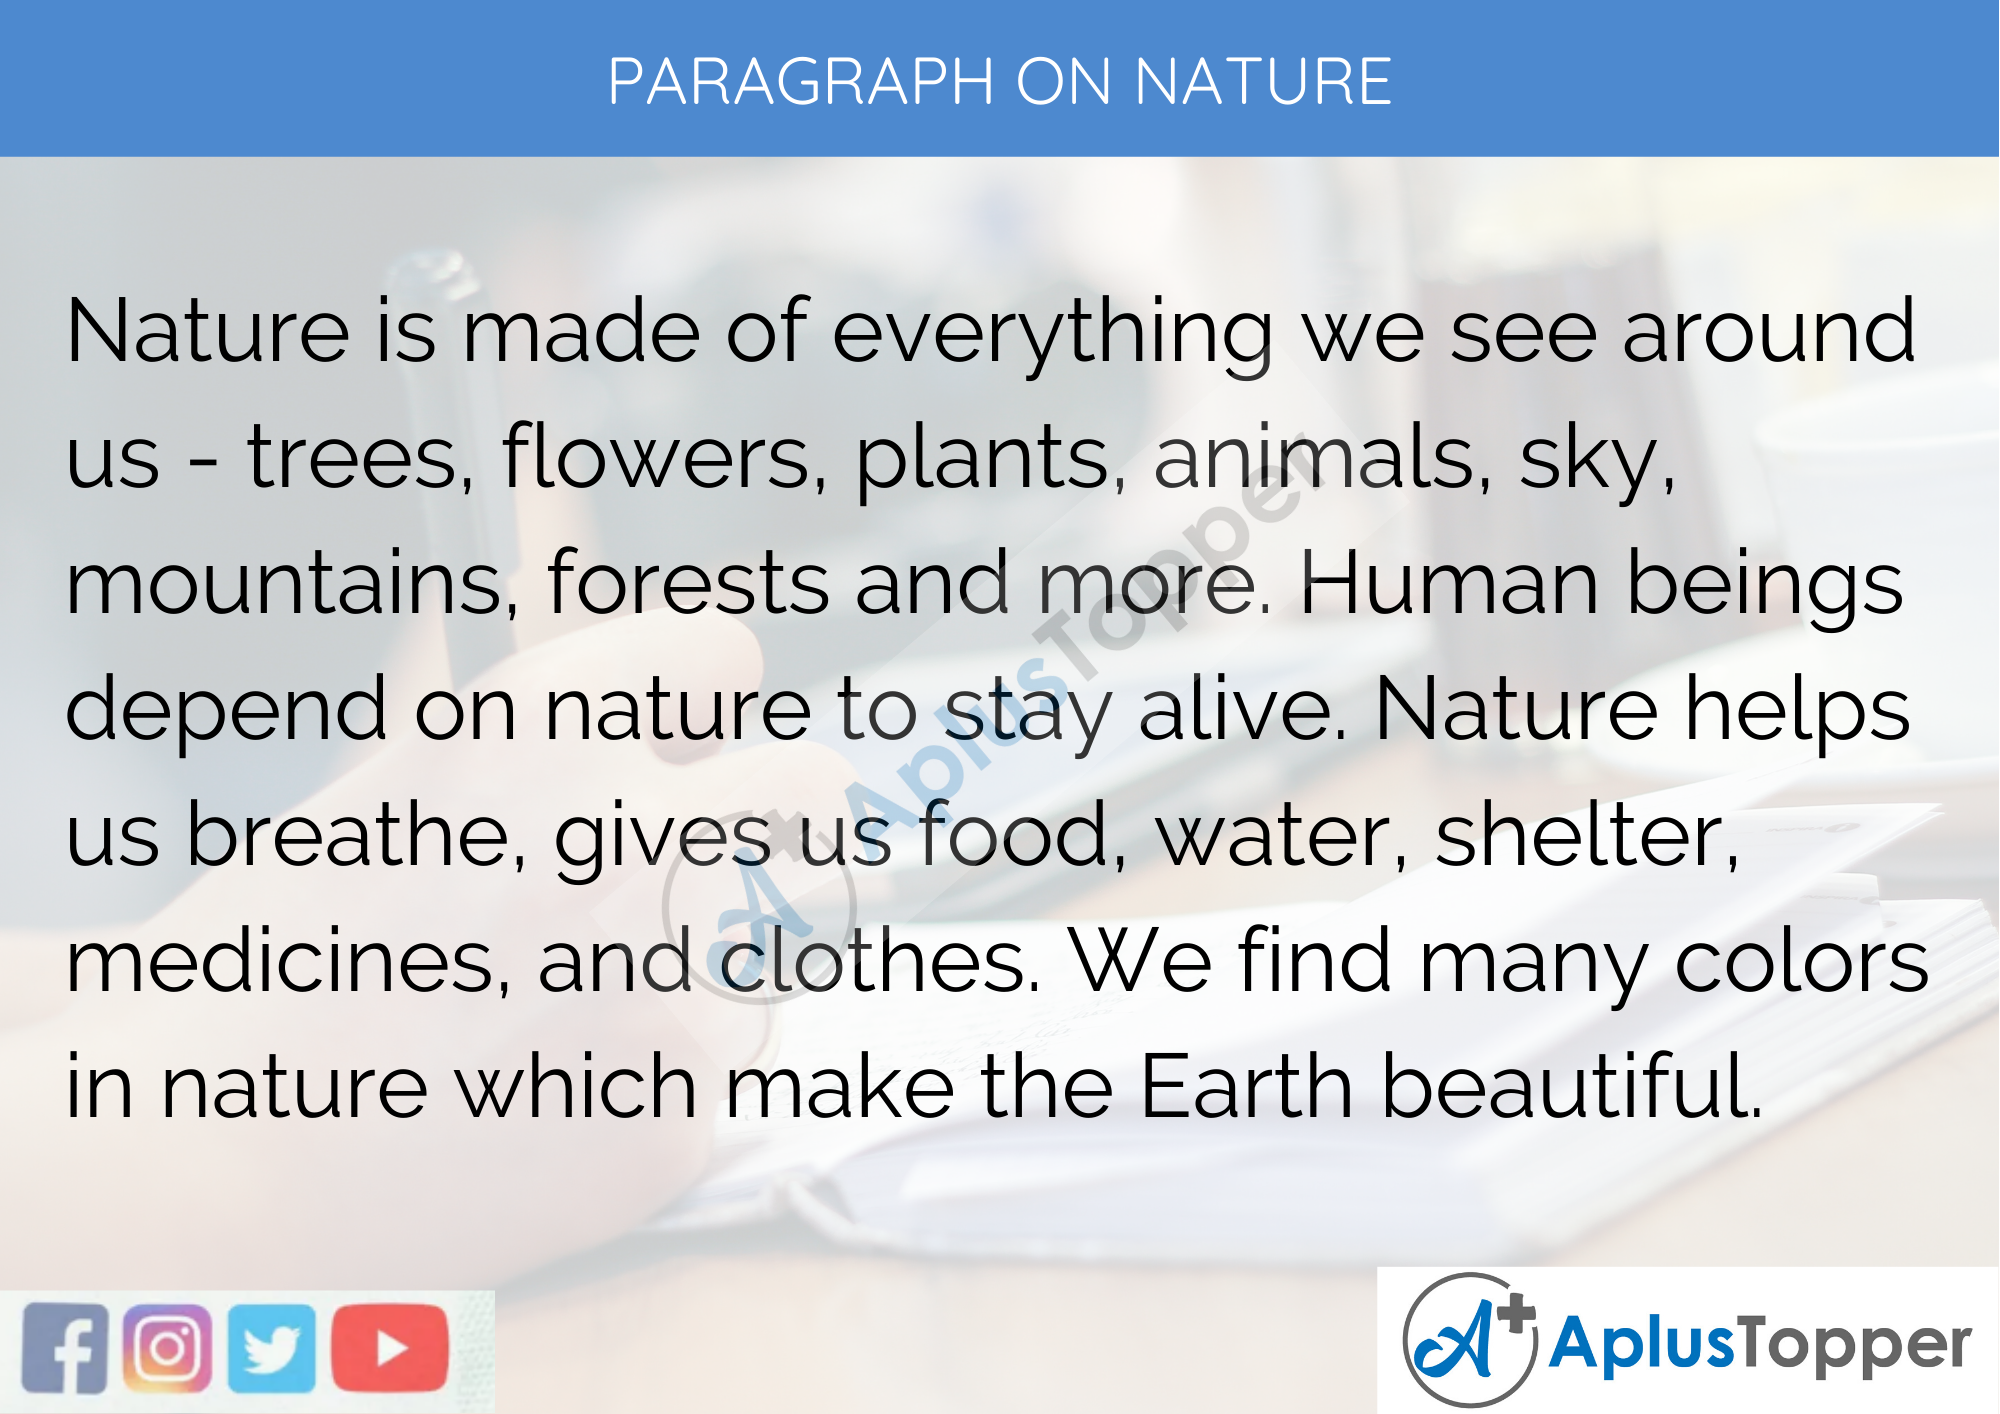 meaning of nature essay